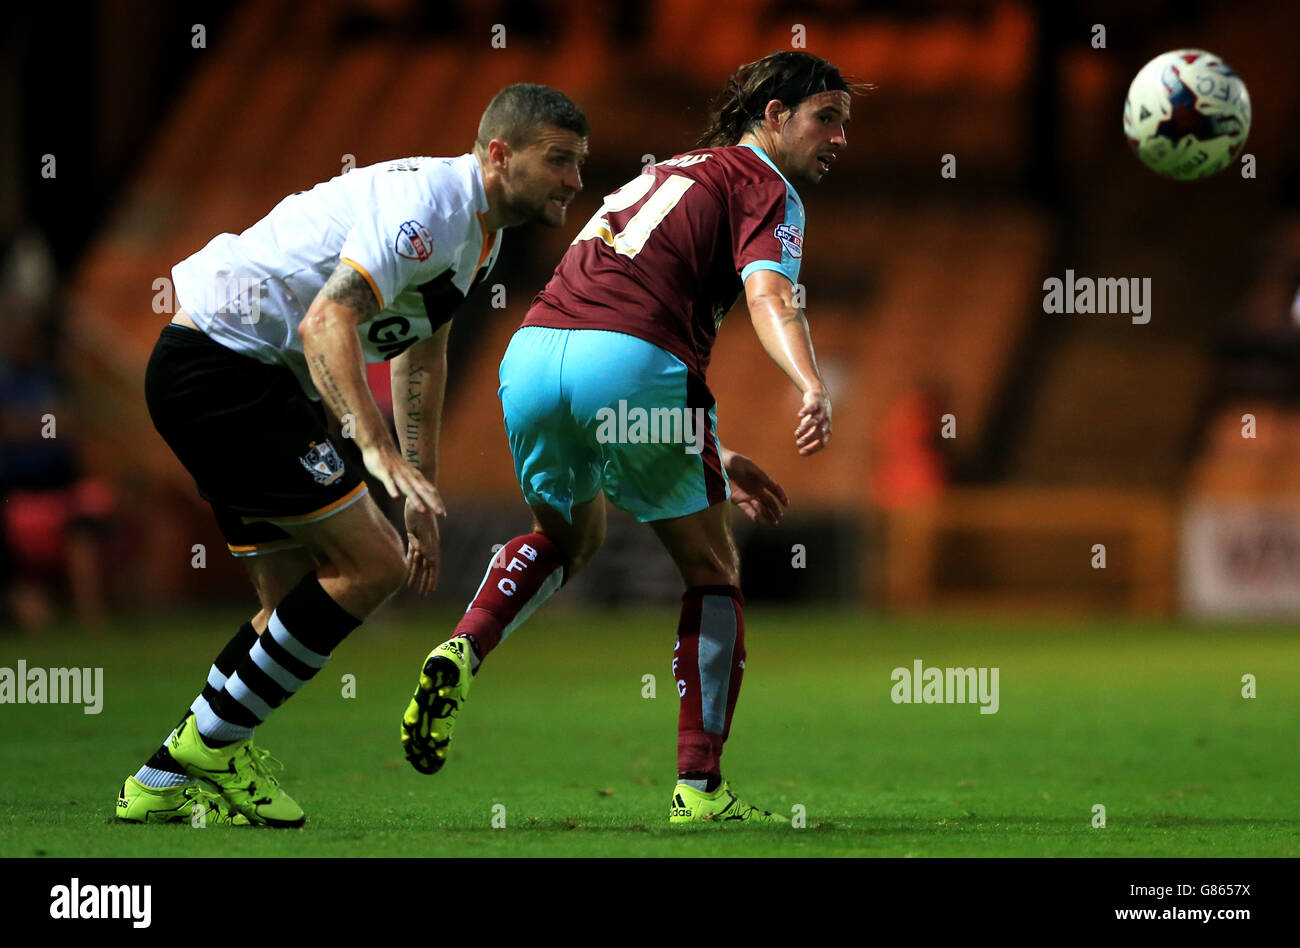 Burnley's George Boyd battles for the ball with Port Vale's Carl Dickinson (left) during the Capital One Cup, First Round match at Vale Park, Stoke-on-Trent. Stock Photo